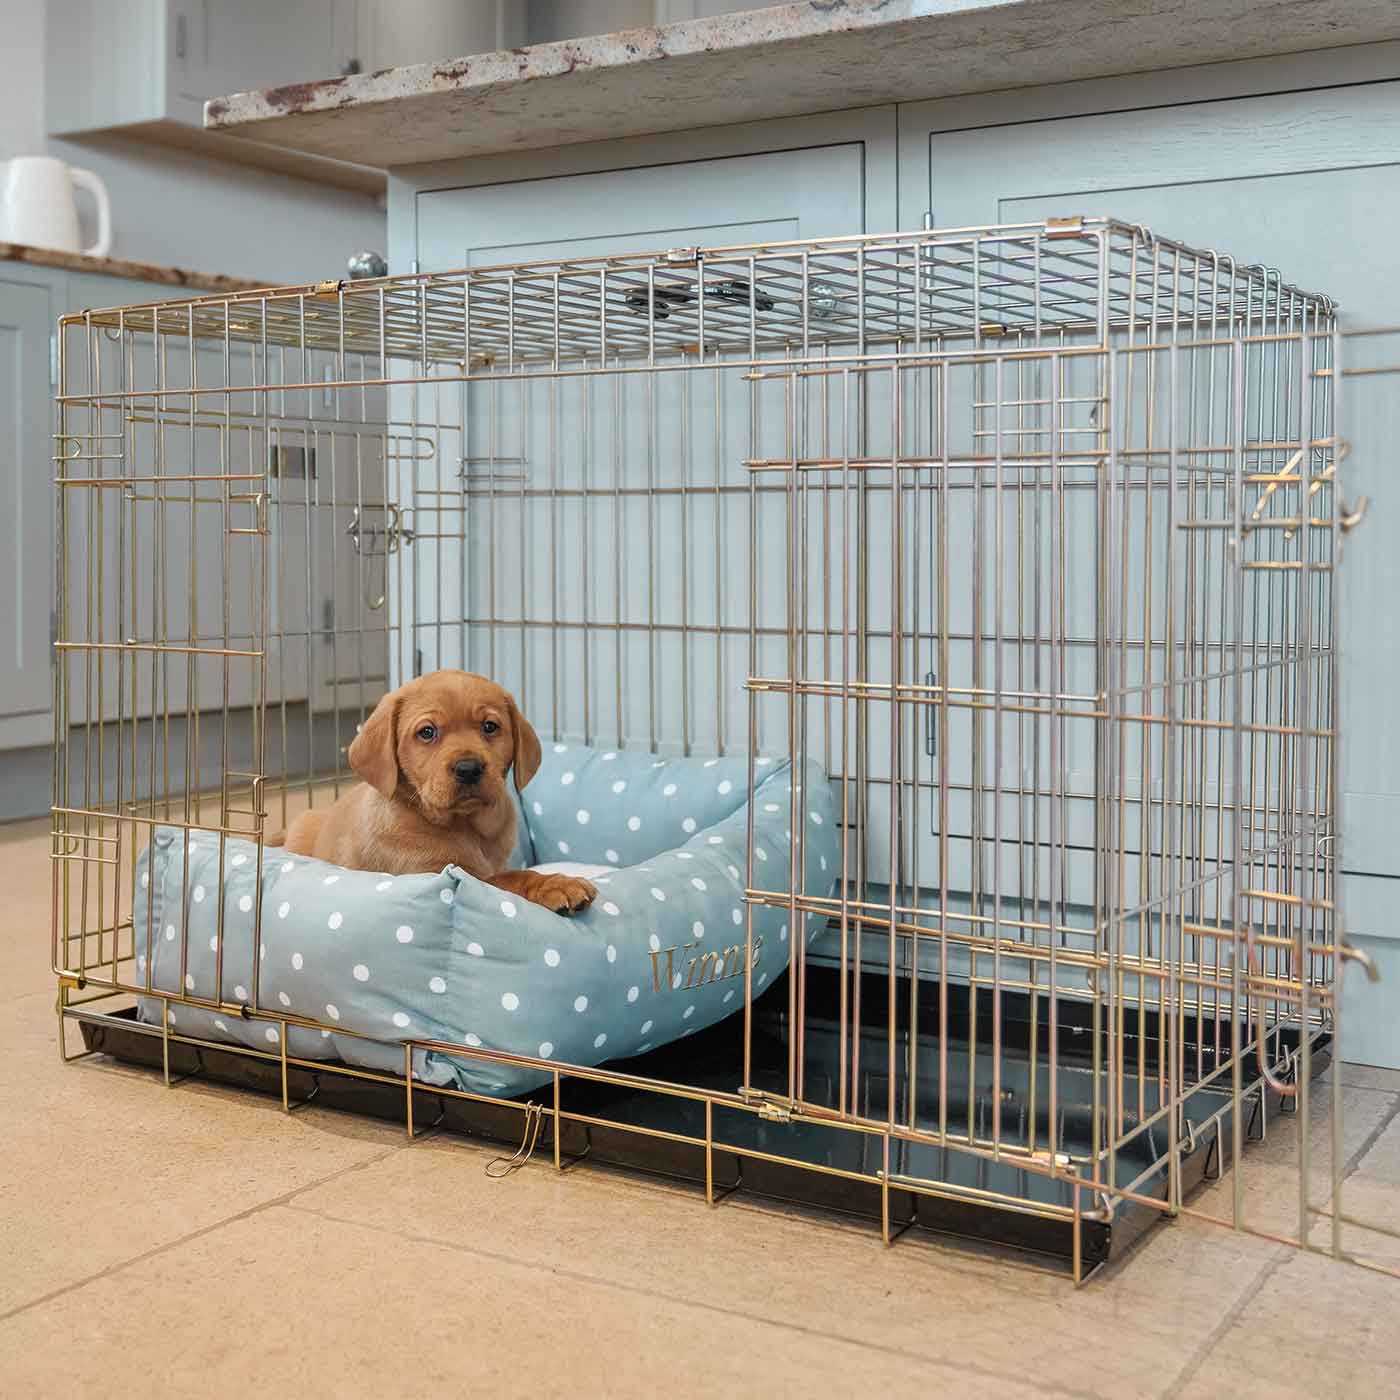  Cosy & Calm Puppy Crate Bed, The Perfect Dog Crate Accessory For The Ultimate Dog Den! In Stunning Duck Egg Spot! Available Now at Lords & Labradors